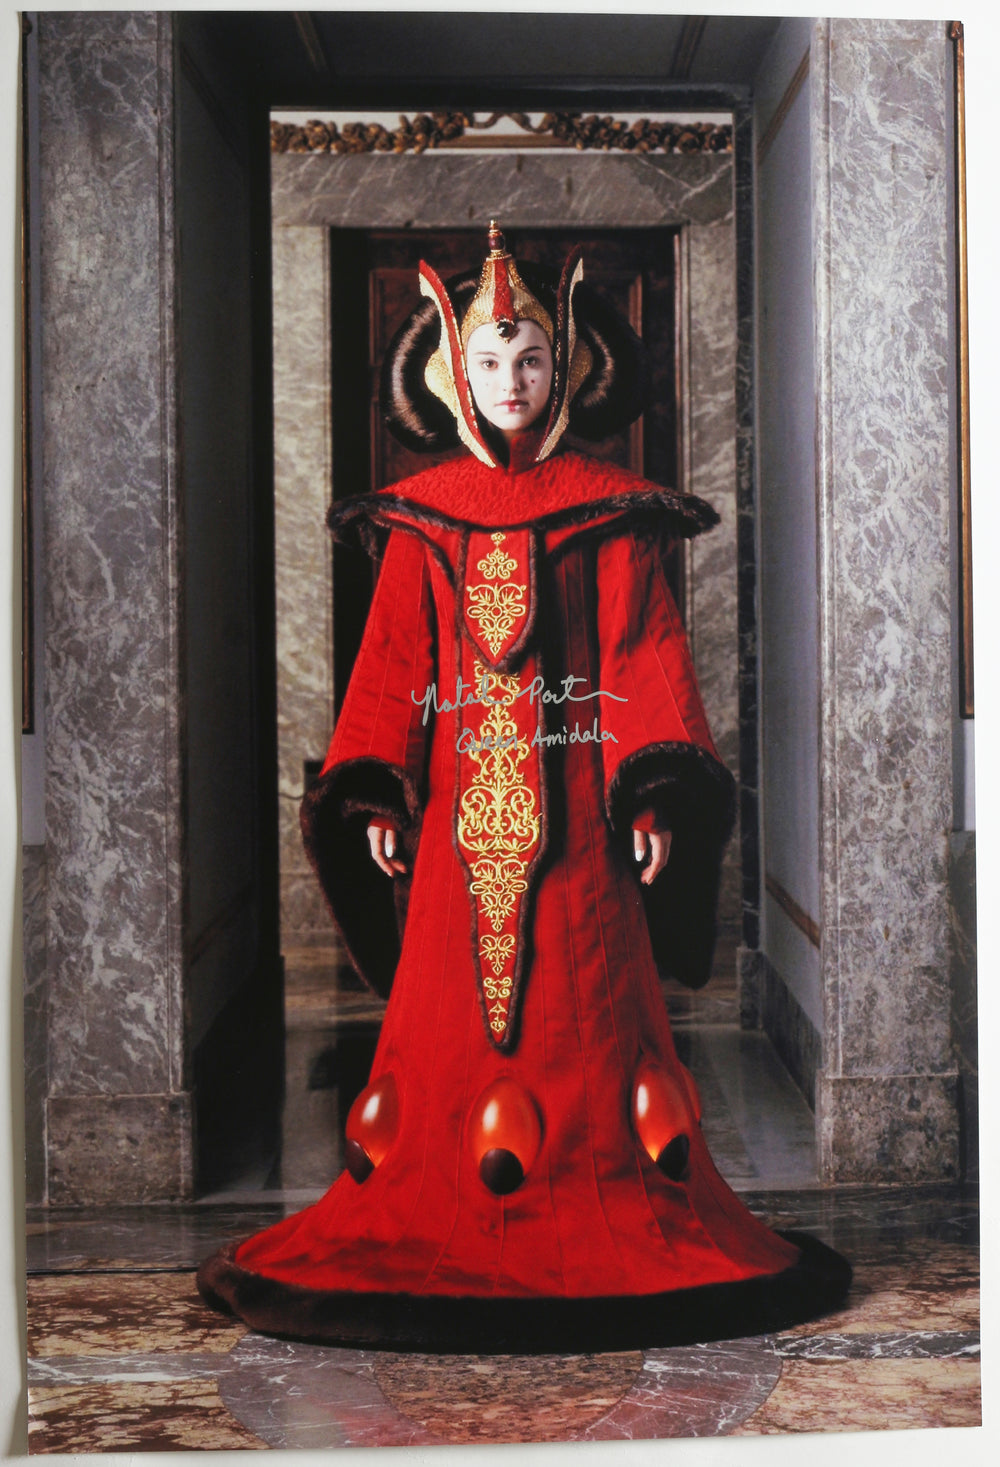 Natalie Portman as Queen Amidala in Star Wars Episode I: The Phantom Menace (BAS Witnessed) Signed 20x30 Poster with Full Character Name